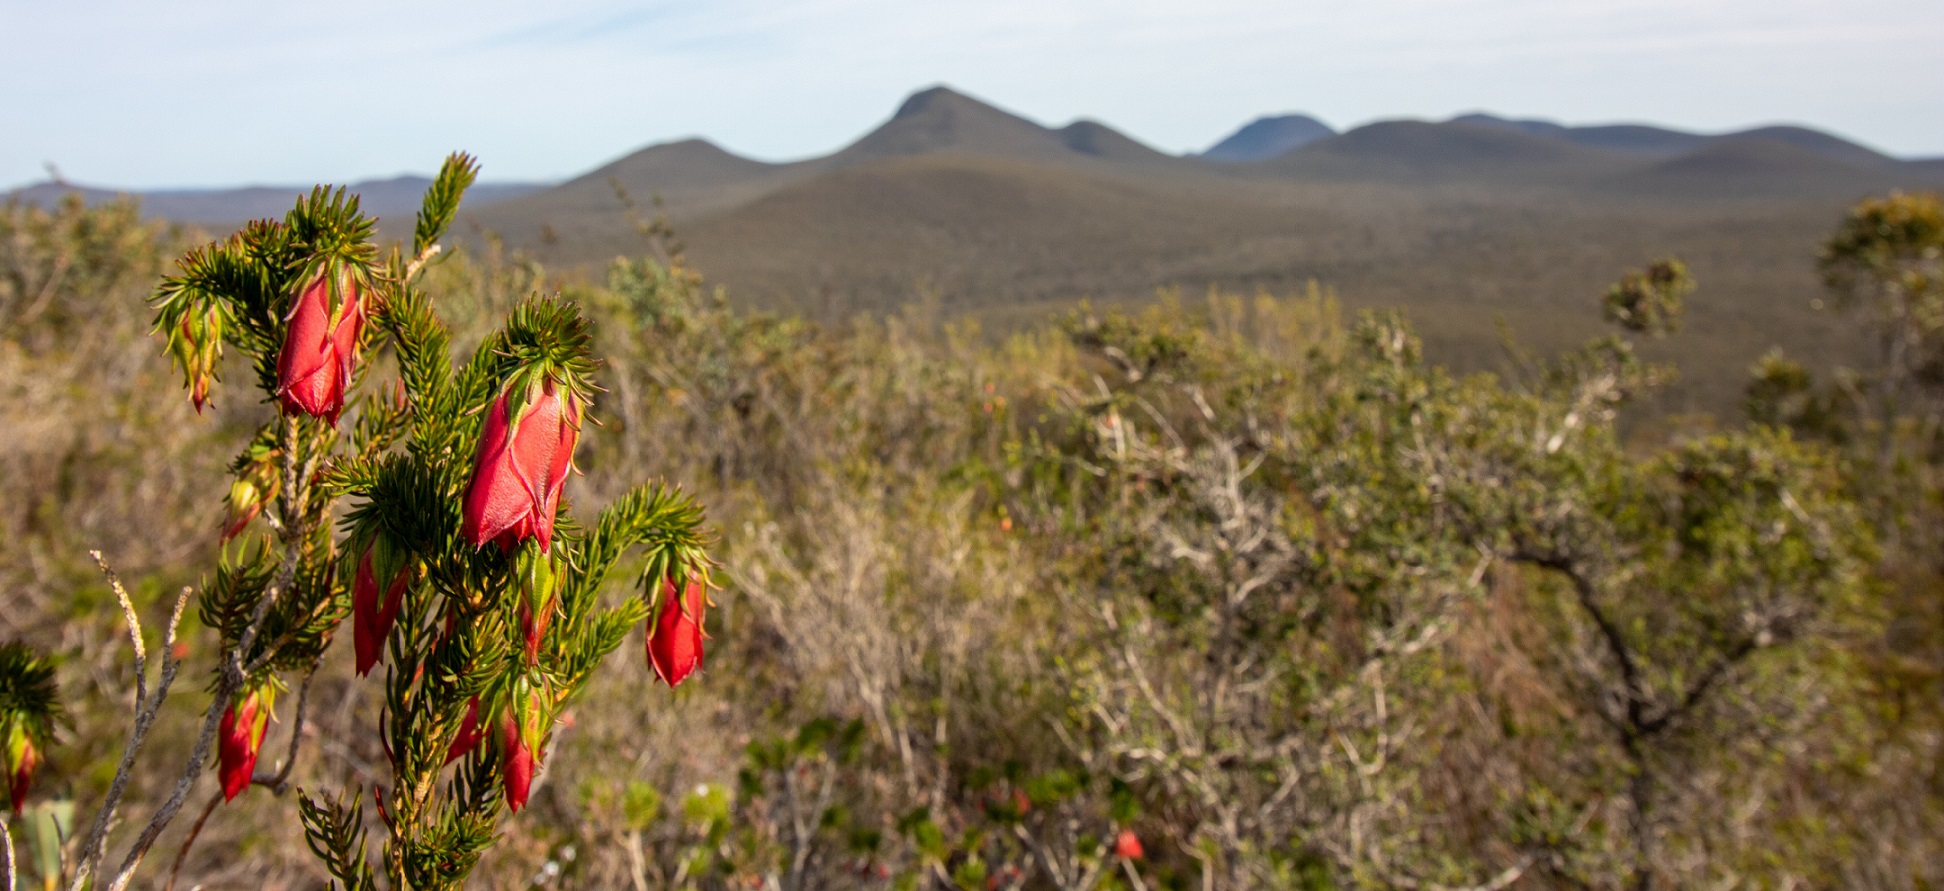 A multi-stemmed shrub, with several red nodding inflorescence. The leaves are short, narrow and glaucous at the top of woody stems. In the background is a forested mountainous landscape.